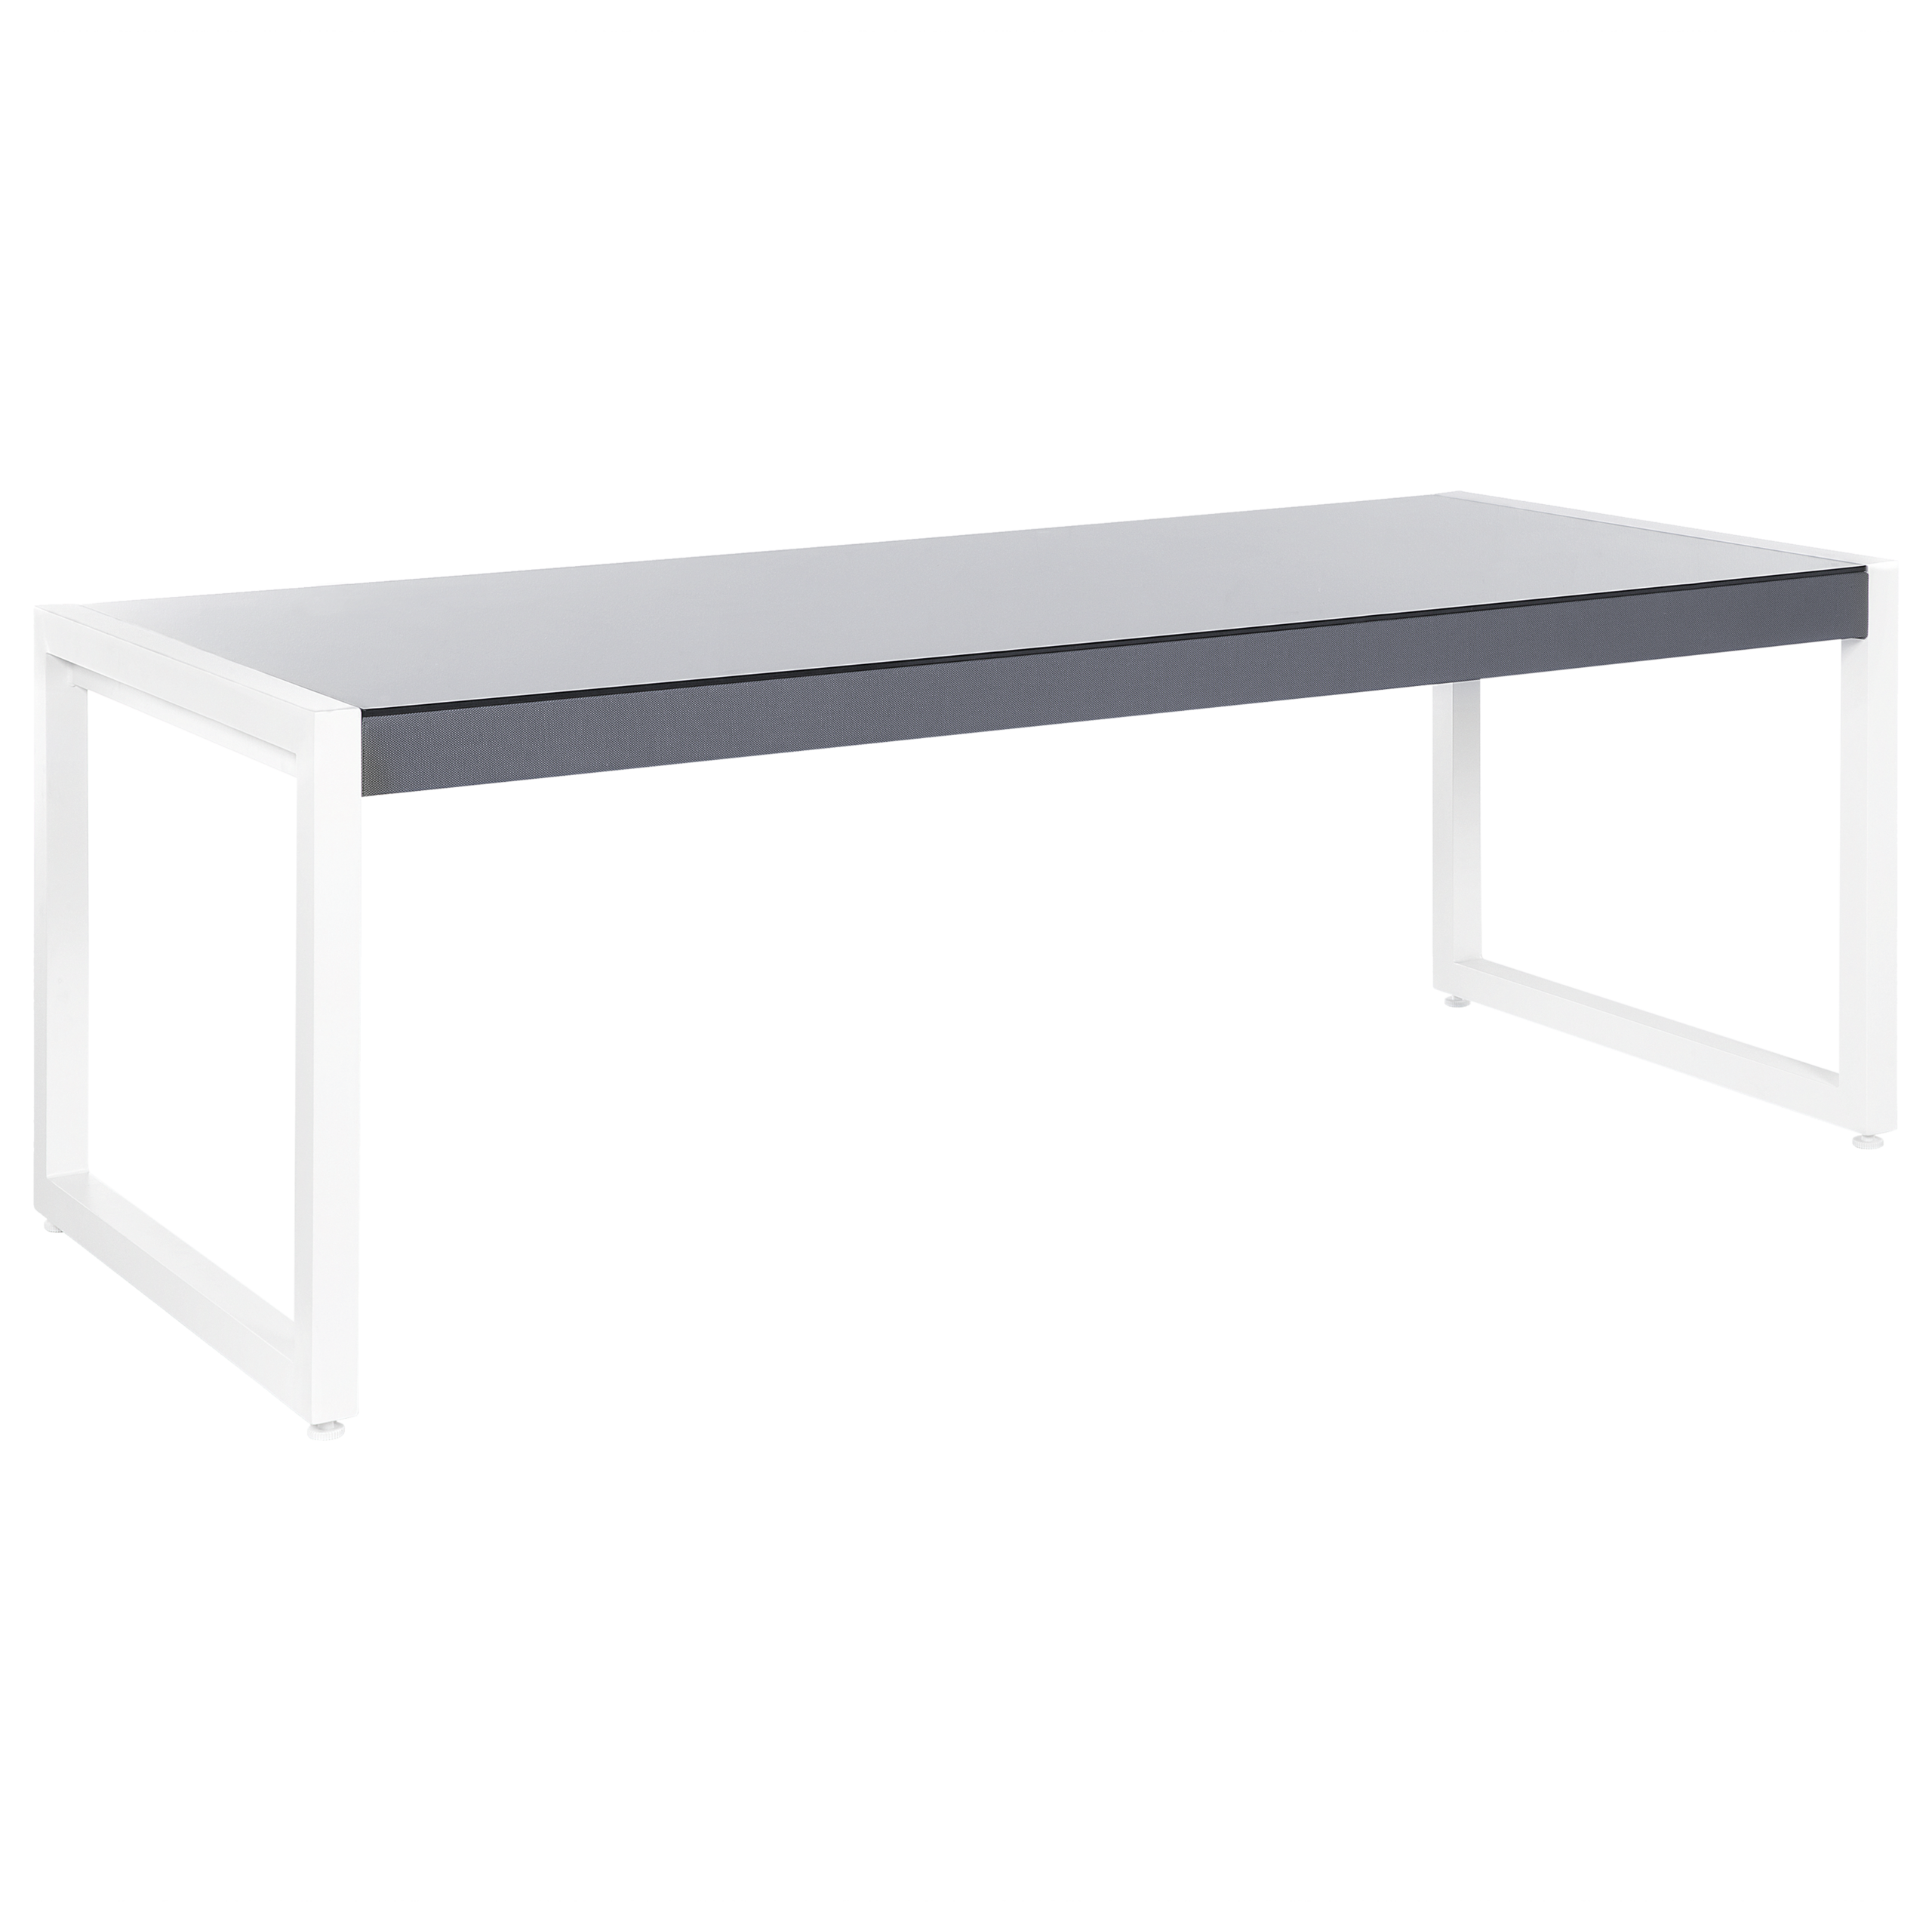 Beliani Garden Dining Table Grey and White Aluminium Glass Tabletop Weather Resistant